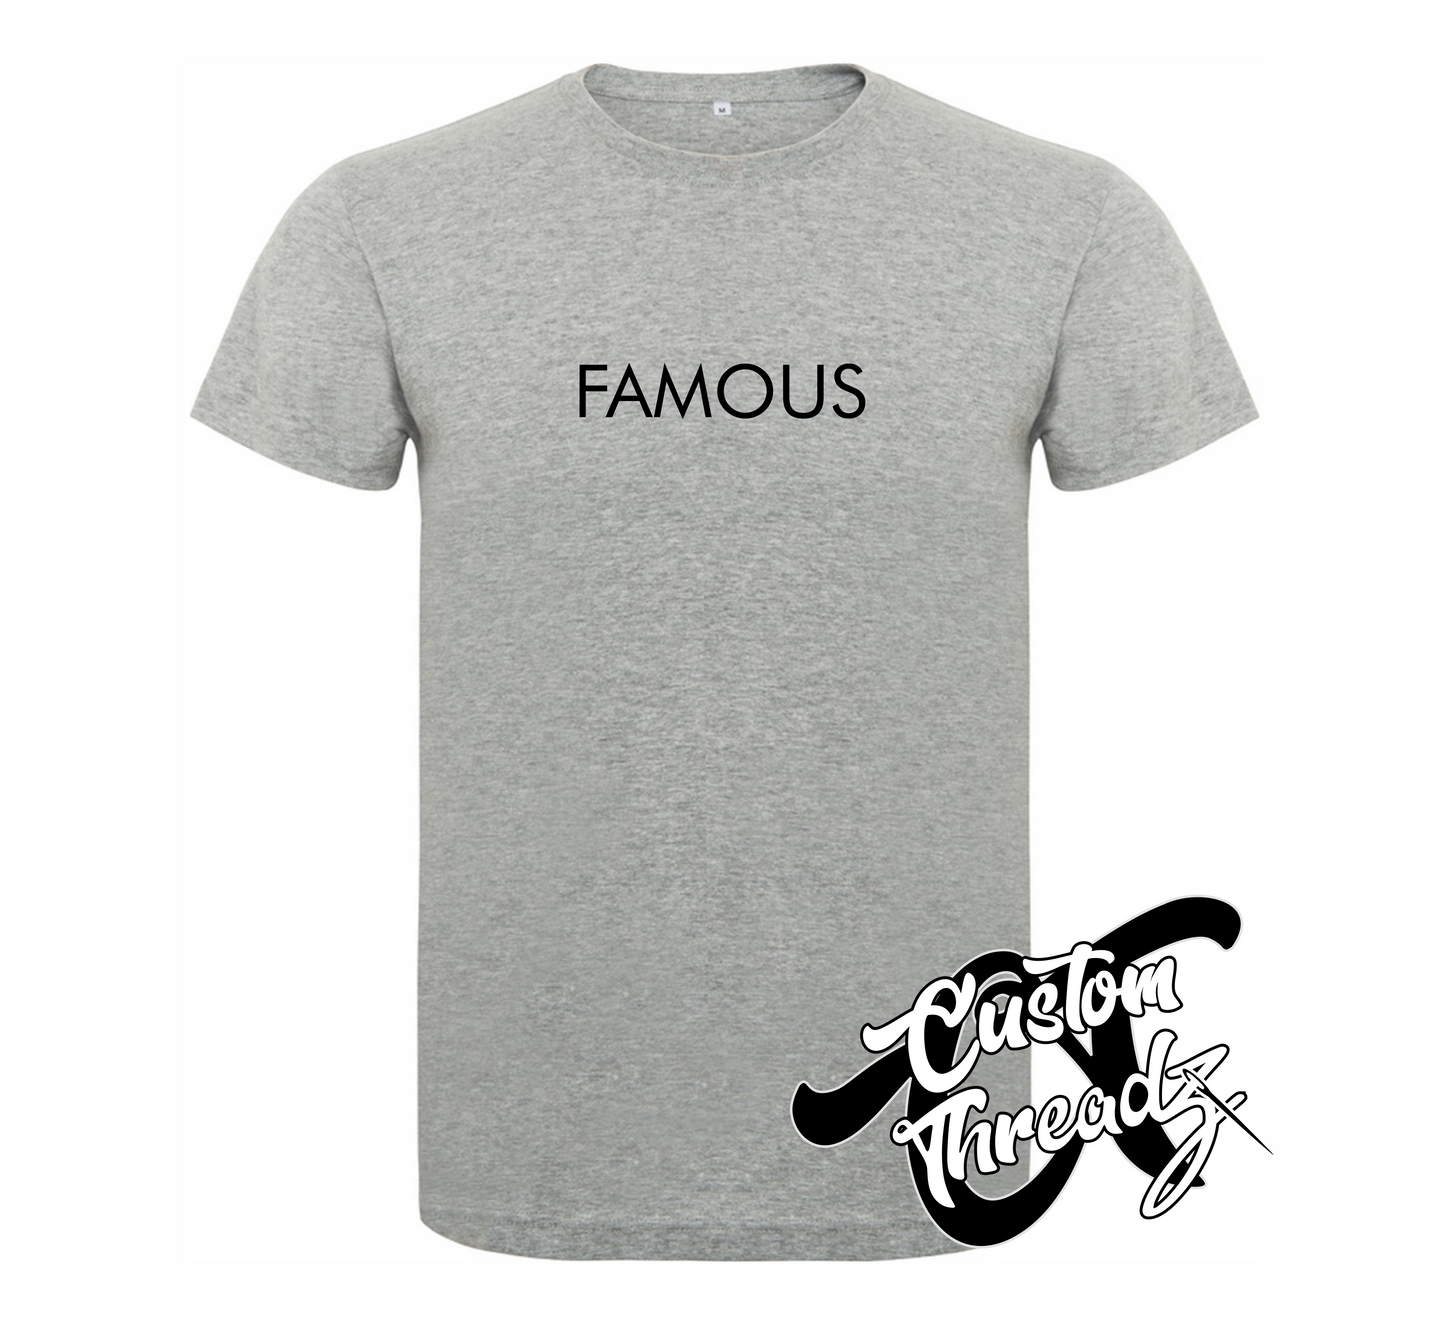 athletic heather grey tee with famous the infamous collection DTG printed design